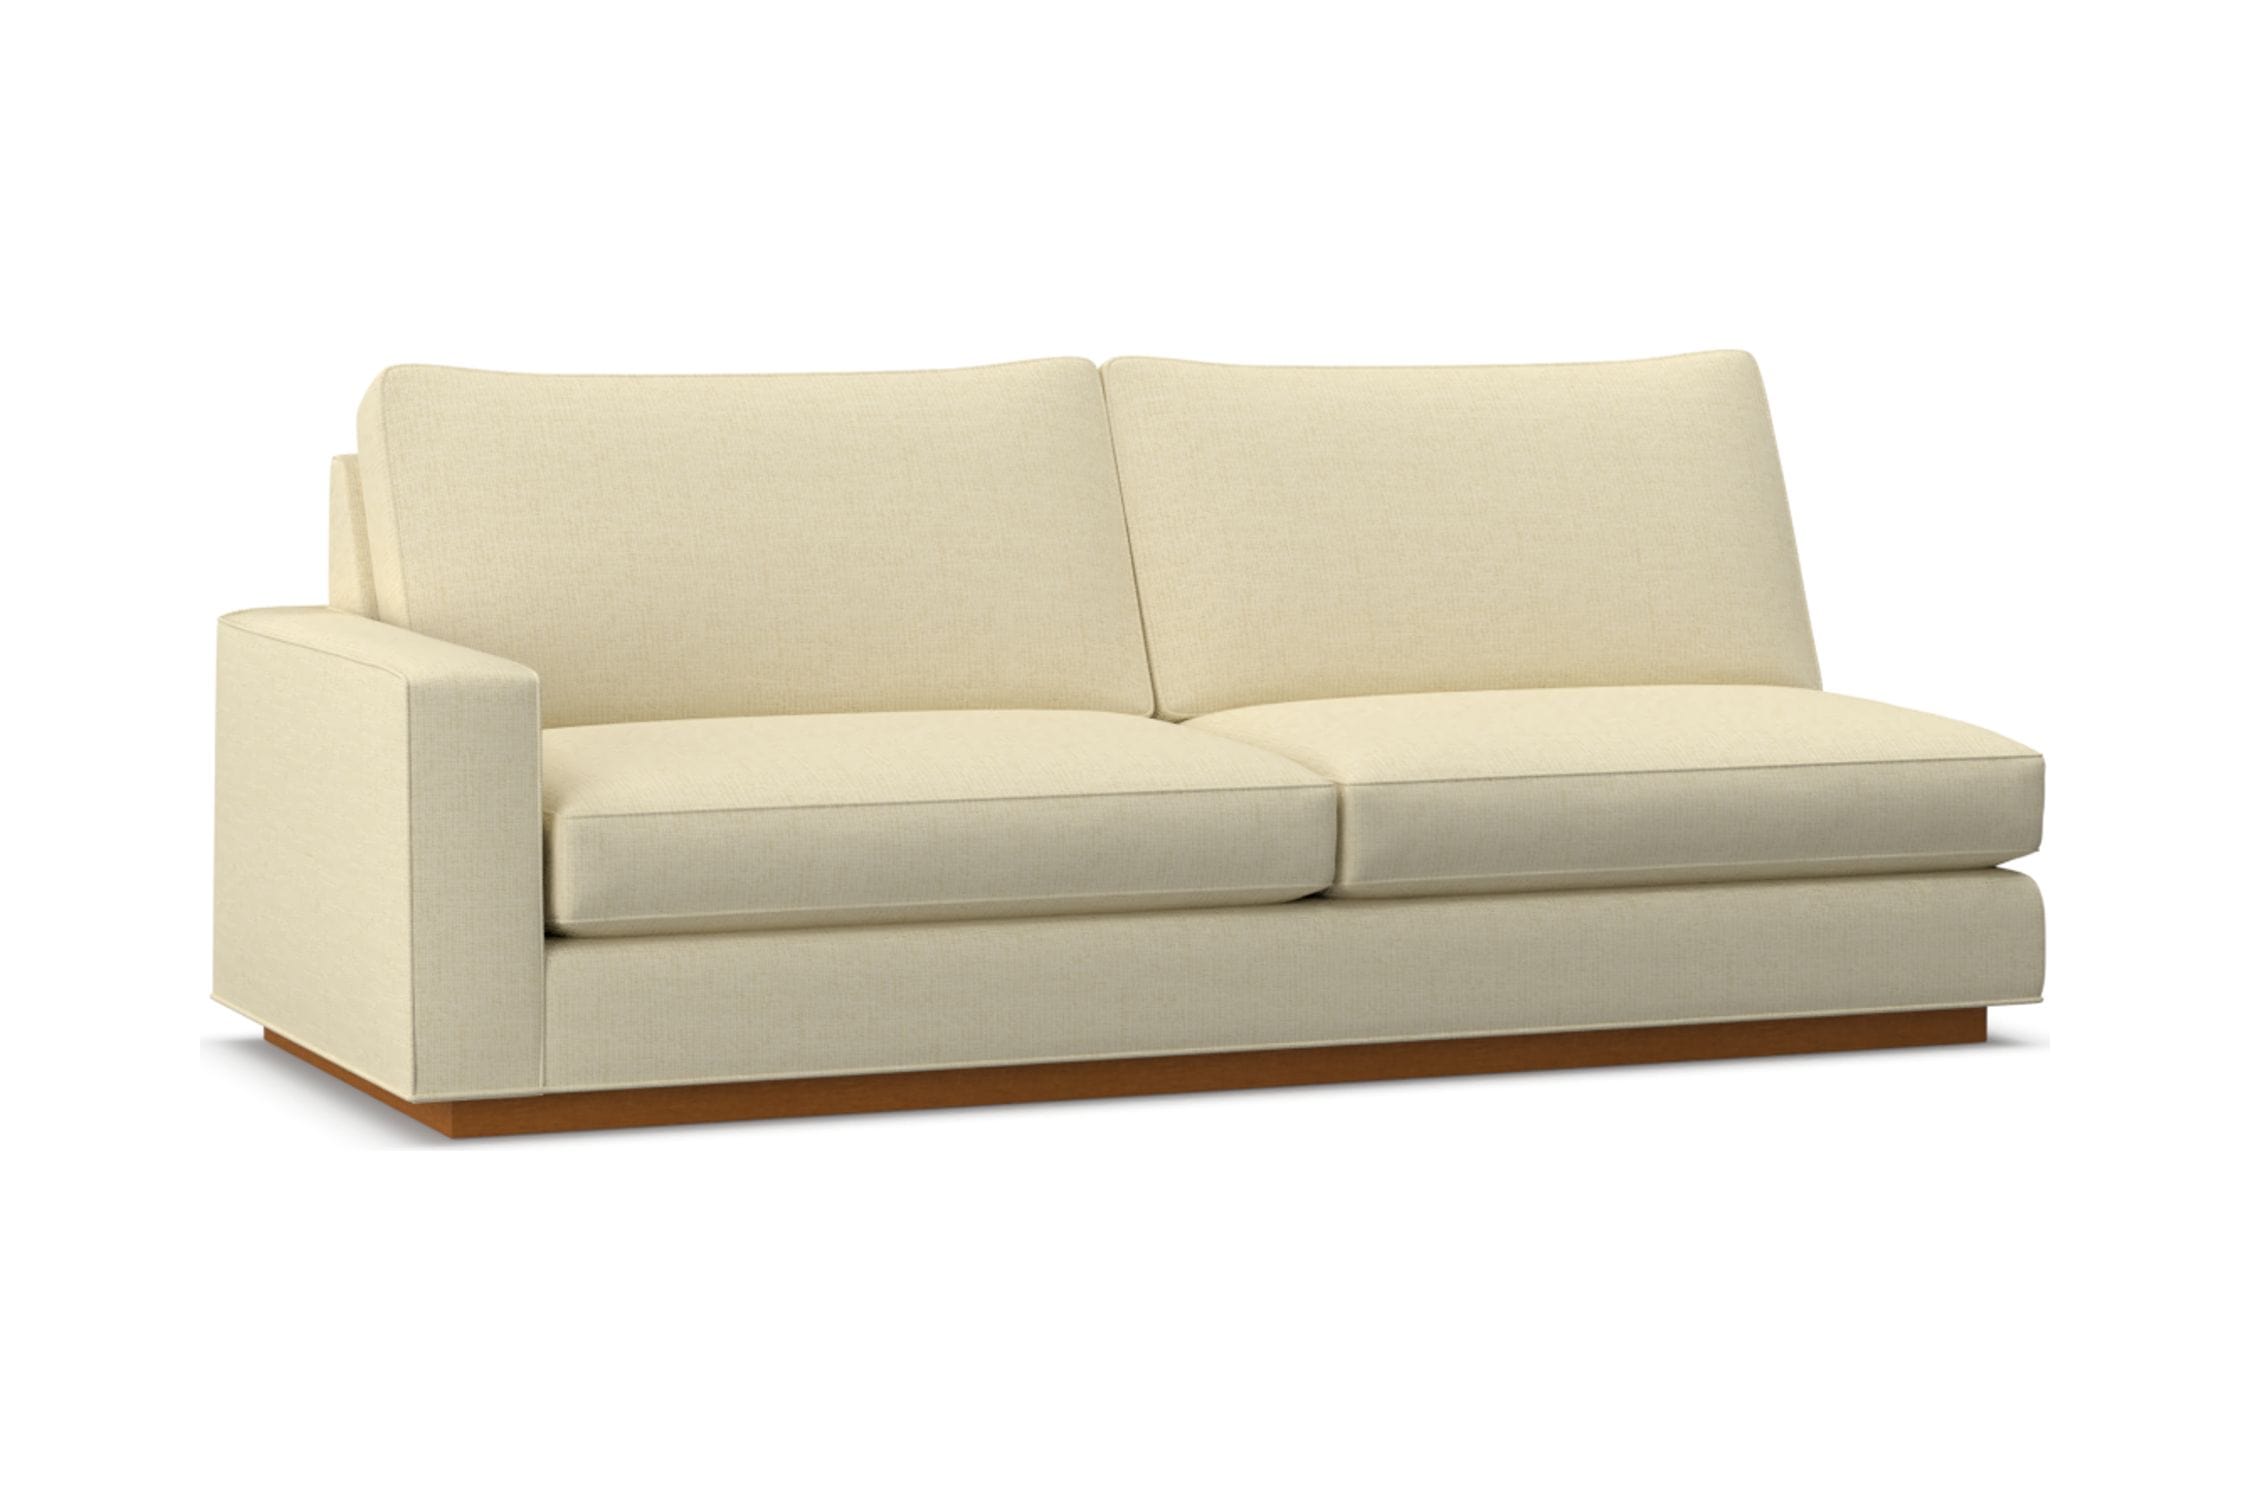 Harper Left Arm Sofa - Beige -  Modular Collection - Build Your Own Sectional